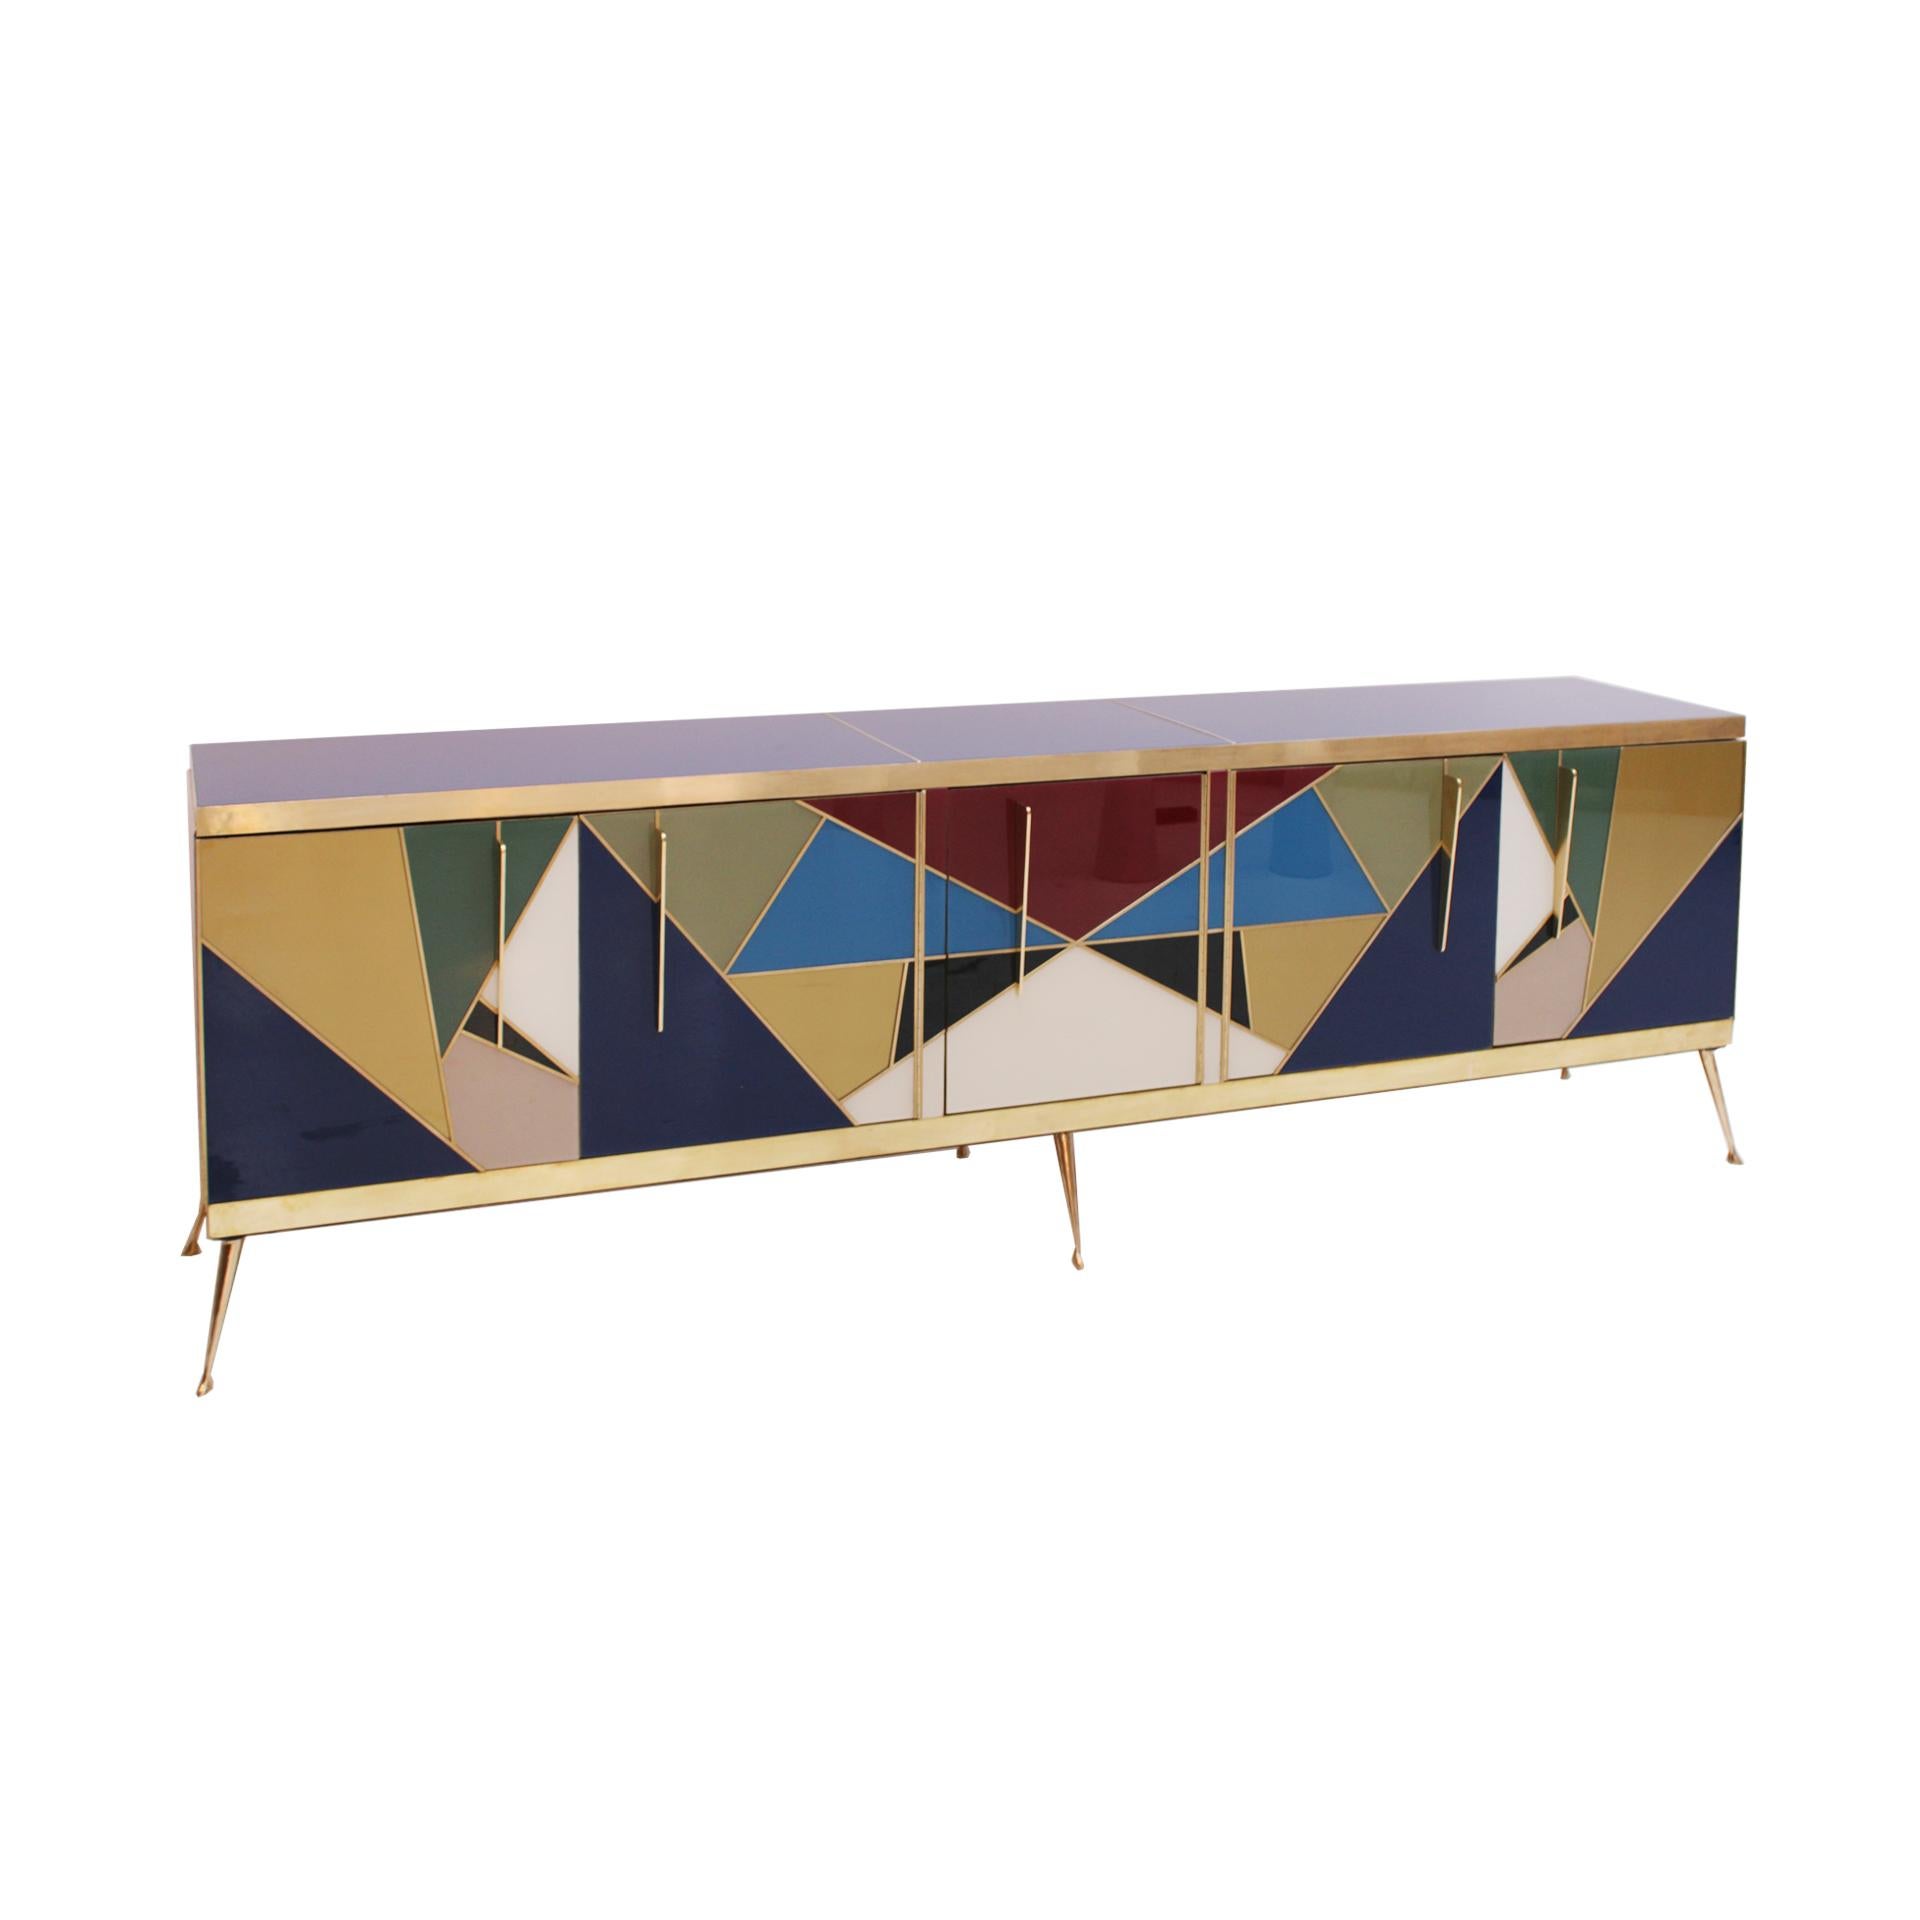 Italian sideboard made of solid wood structure from the 1950s covered in Murano colored glass. Geometric art deco composition. Composed of five doors with brass handles and legs. Interior set of drawers on the right side.

Every item LA Studio